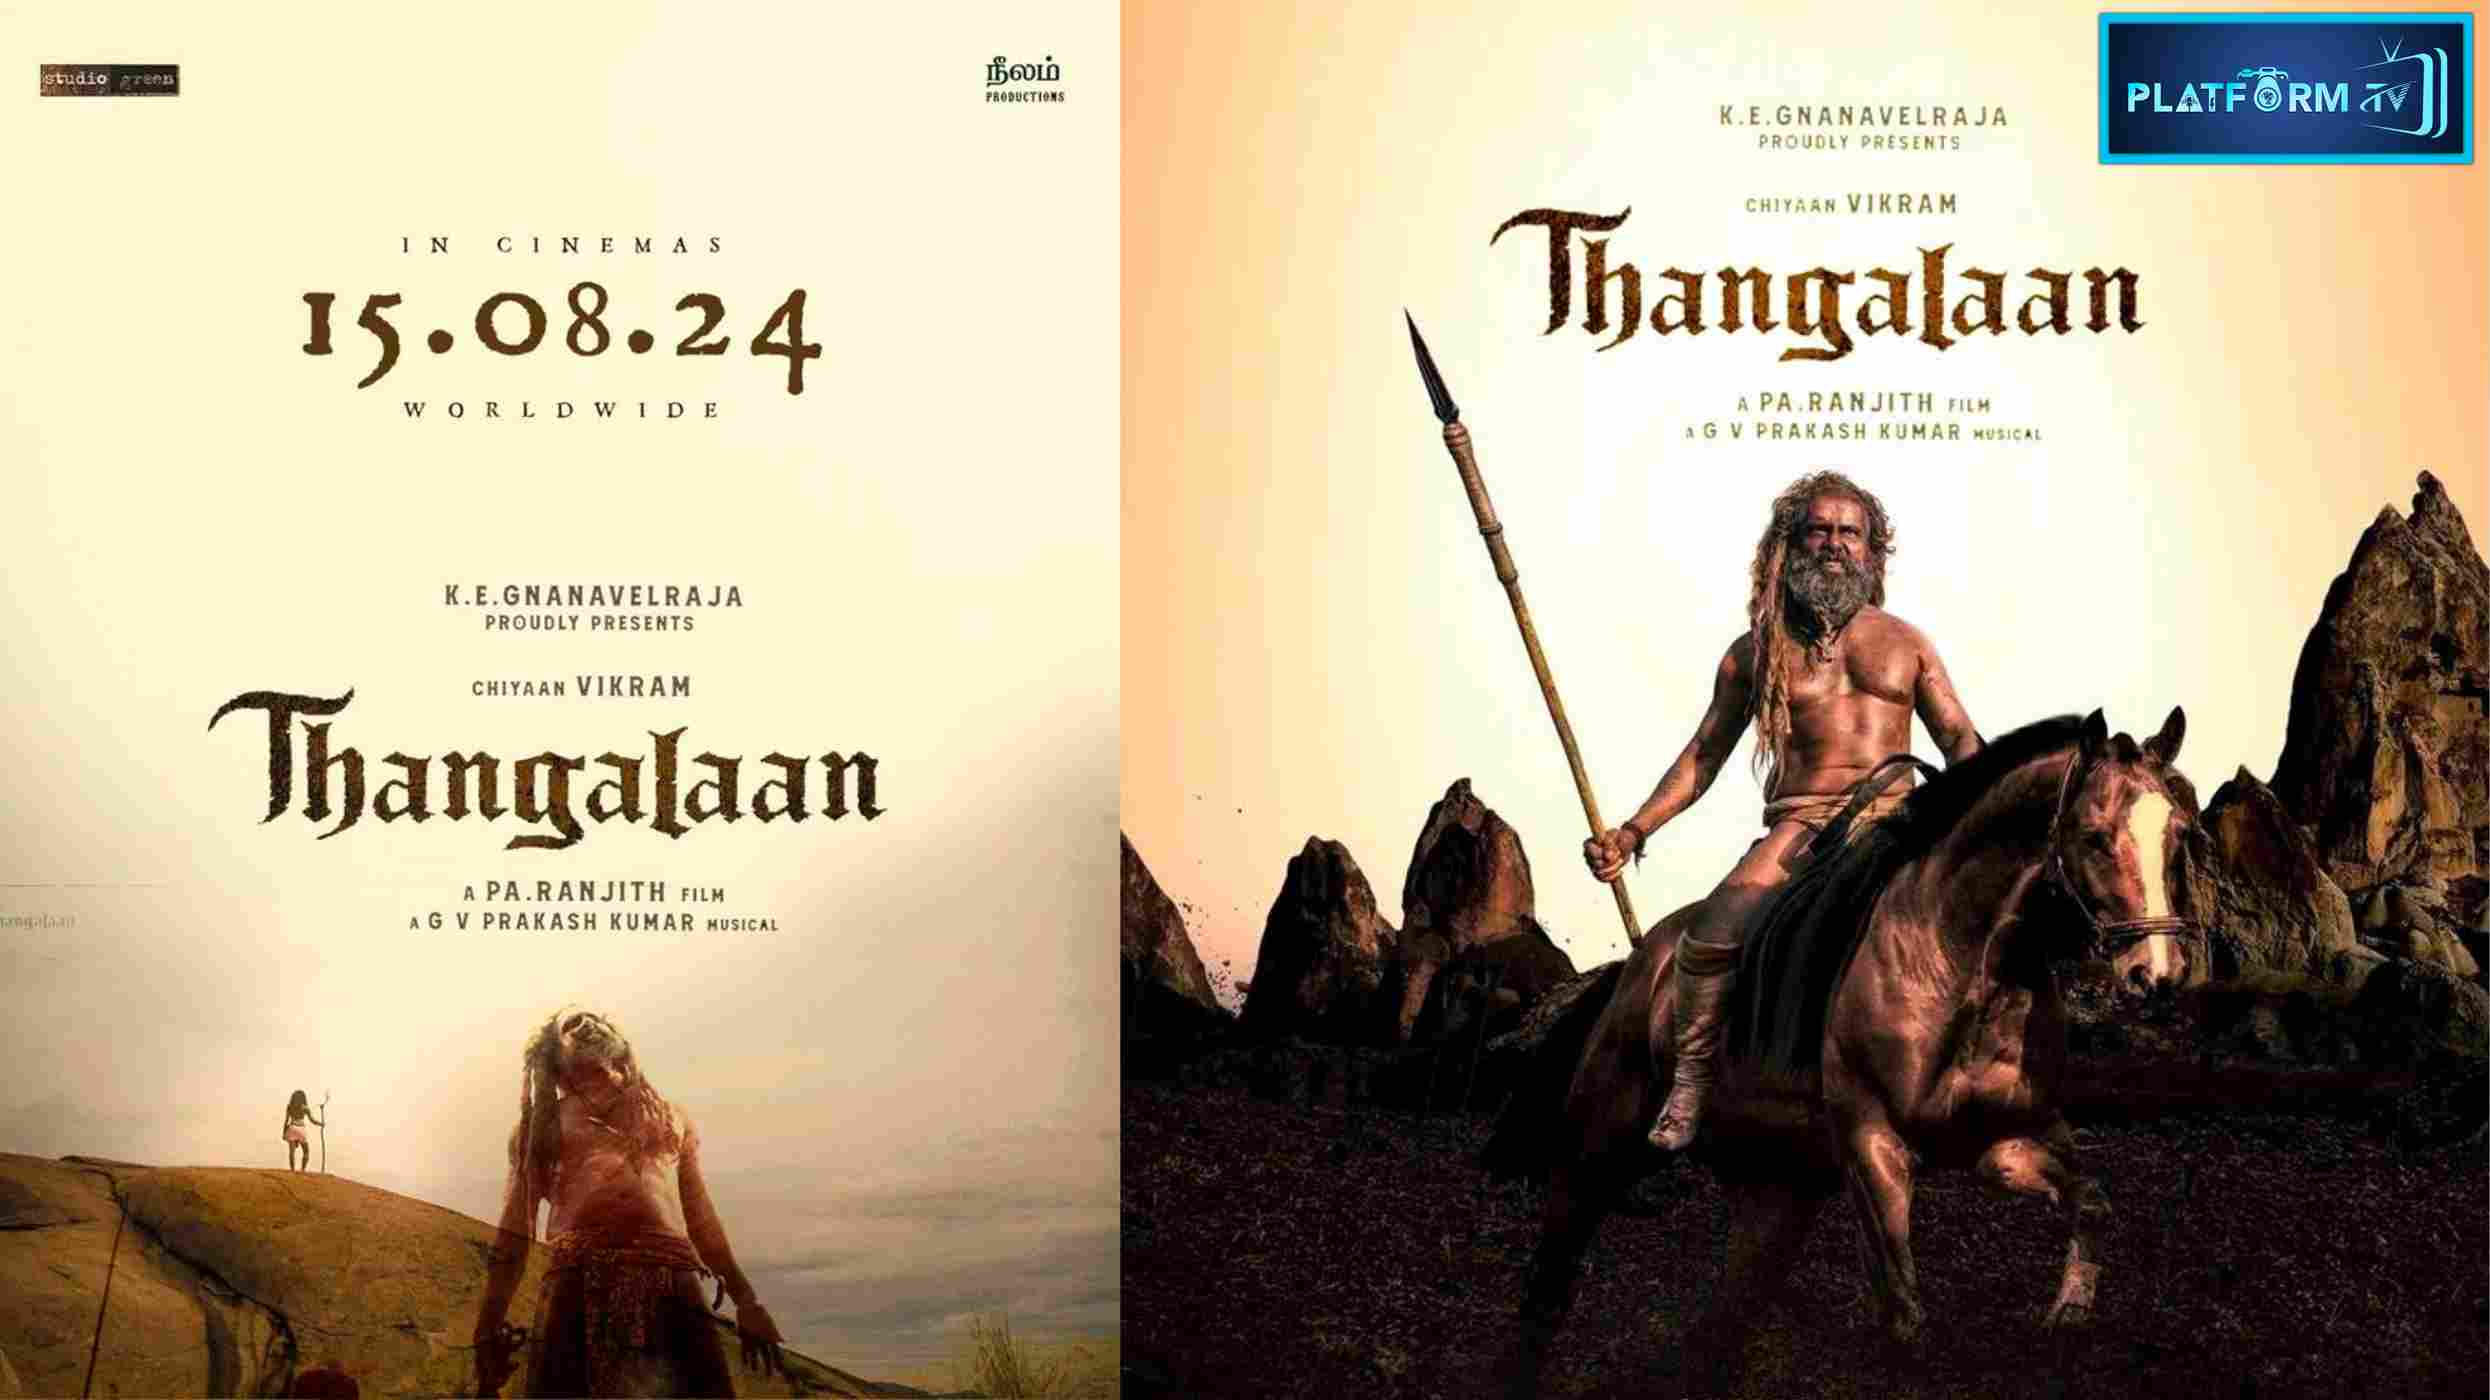 Thangalaan Release Date